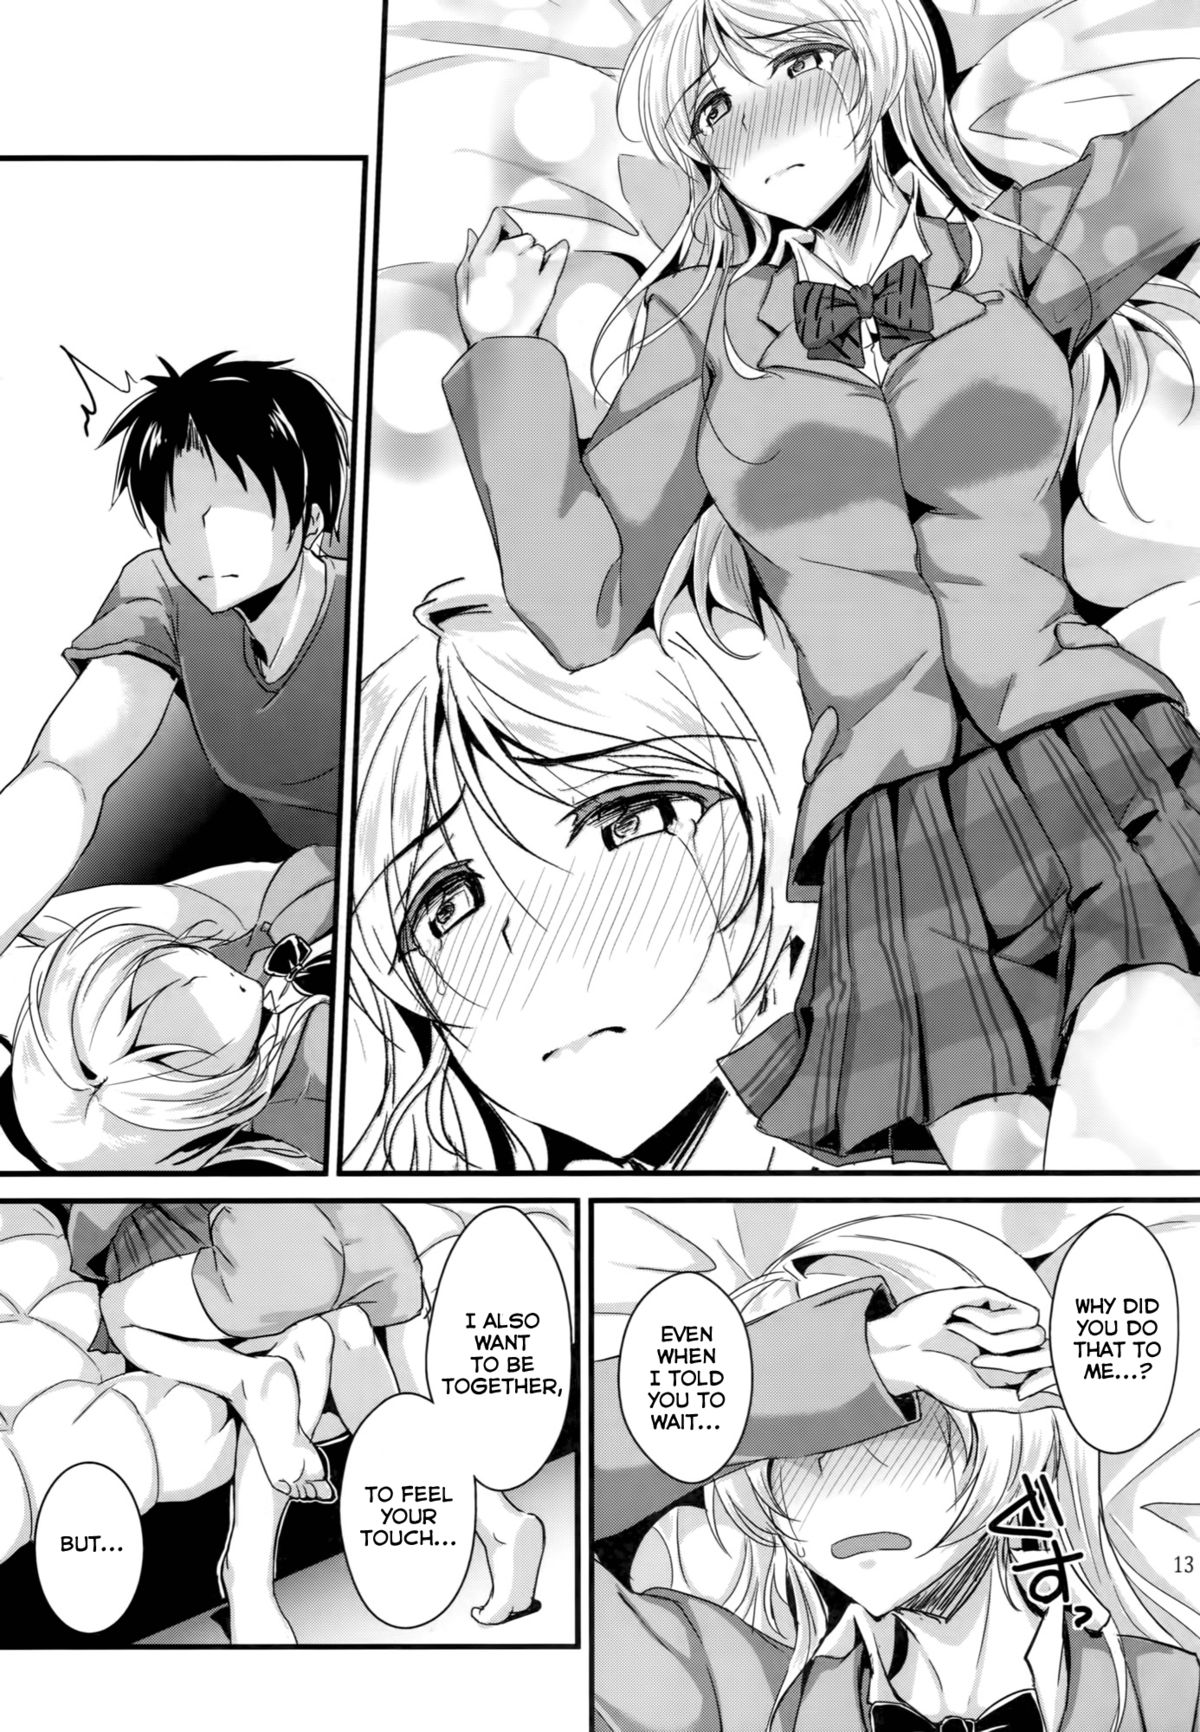 (C87) [Nuno no Ie (Moonlight)] Let's Study××× 5 (Love Live!) [English] [Facedesk] page 12 full